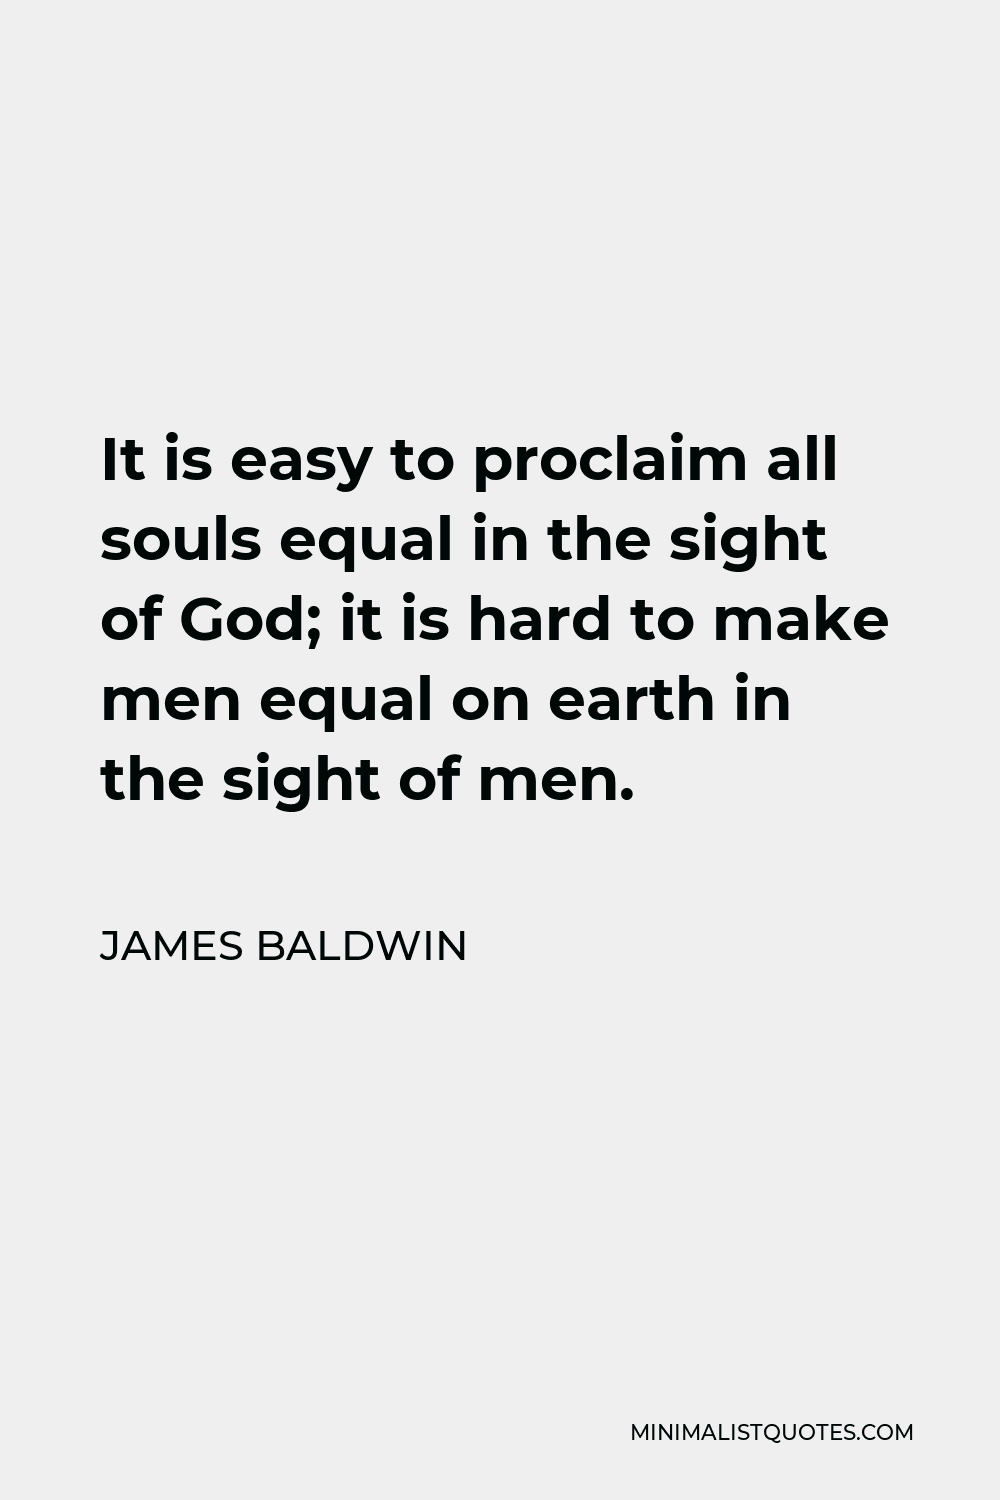 James Baldwin Quote - It is easy to proclaim all souls equal in the sight of God; it is hard to make men equal on earth in the sight of men.